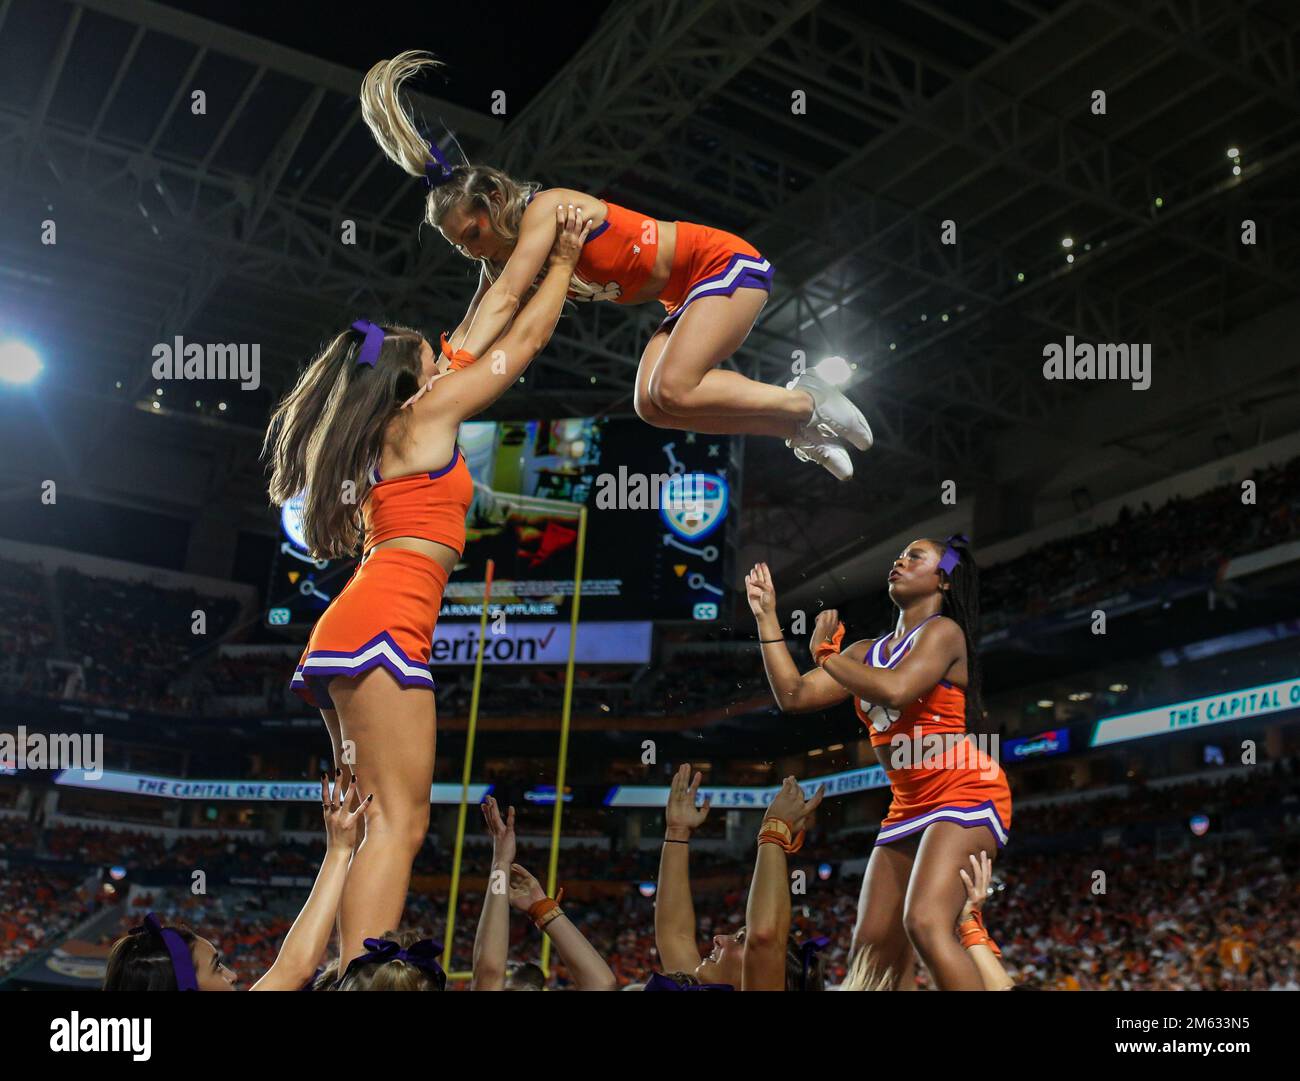 Miami Gardens, FL, USA. 30th Dec, 2022. The Clemson cheerleaders perform a pyramid stunt during the 2022 Capital One Orange Bowl football game between the Clemson Tigers and Tennessee Volunteers at Hard Rock Stadium in Miami Gardens, FL. Kyle Okita/CSM/Alamy Live News Stock Photo